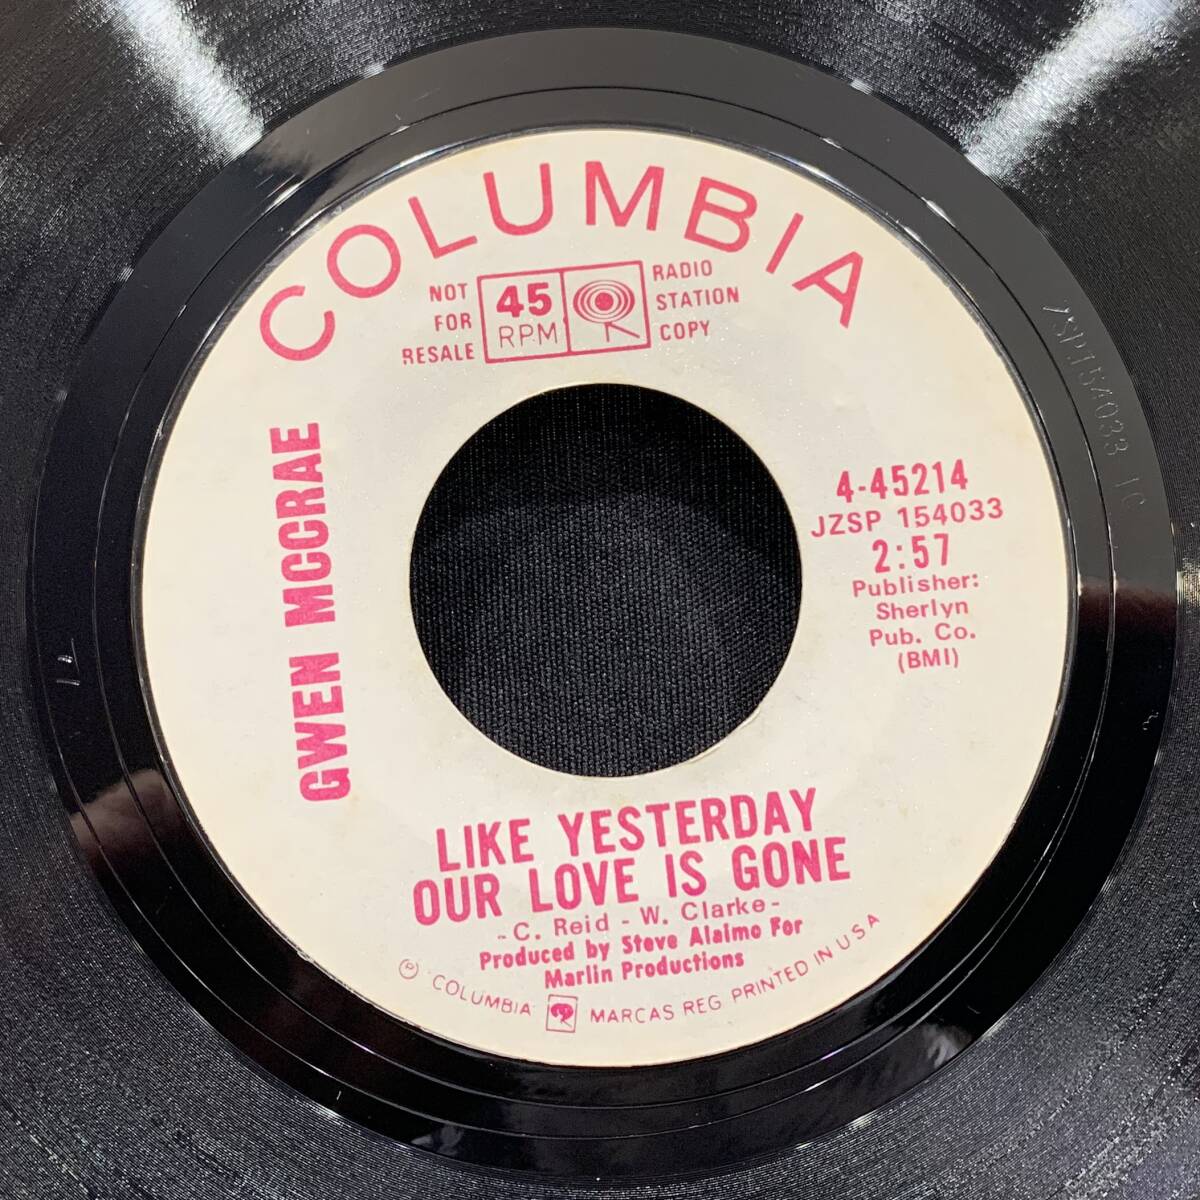 【EP】Gwen McCrae - Lead Me On / Like Yesterday Our Love Is Gone 1970年USオリジナル Promo Columbia 4-45214 の画像2